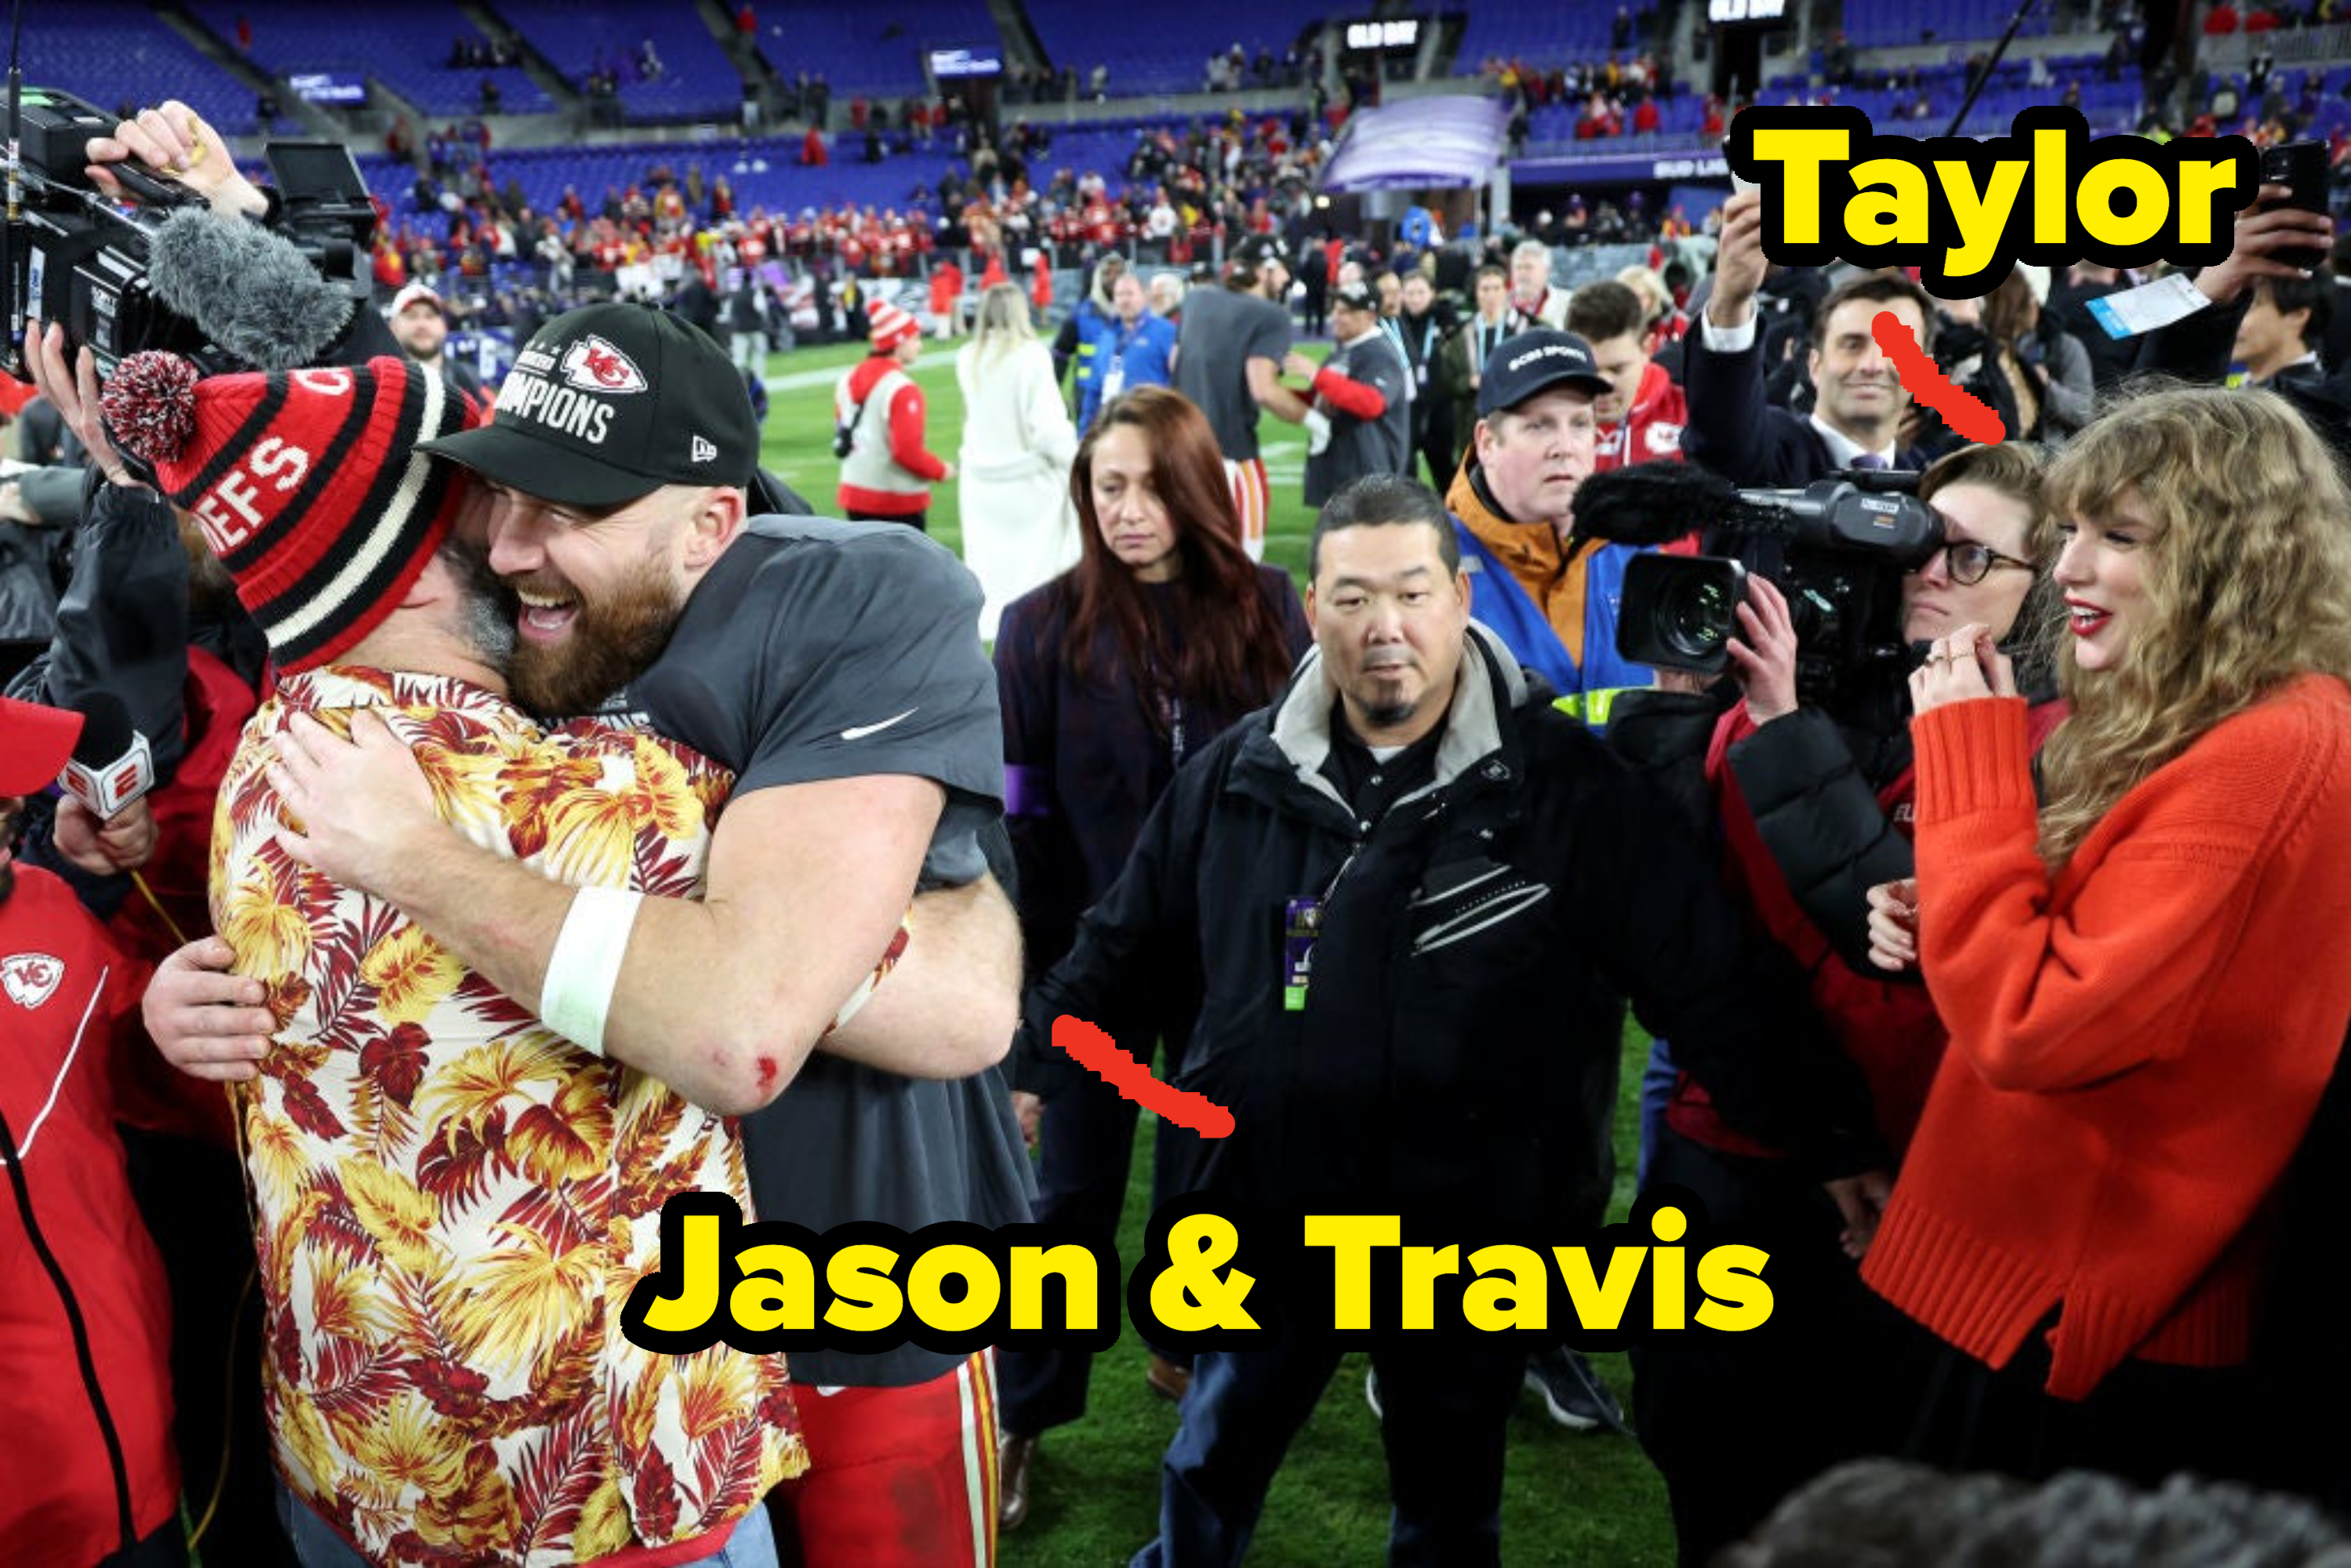 Taylor Swift smiles and watches Travis Kelce embrace a fan in a colorful shirt at a sports event. They are surrounded by photographers and fans